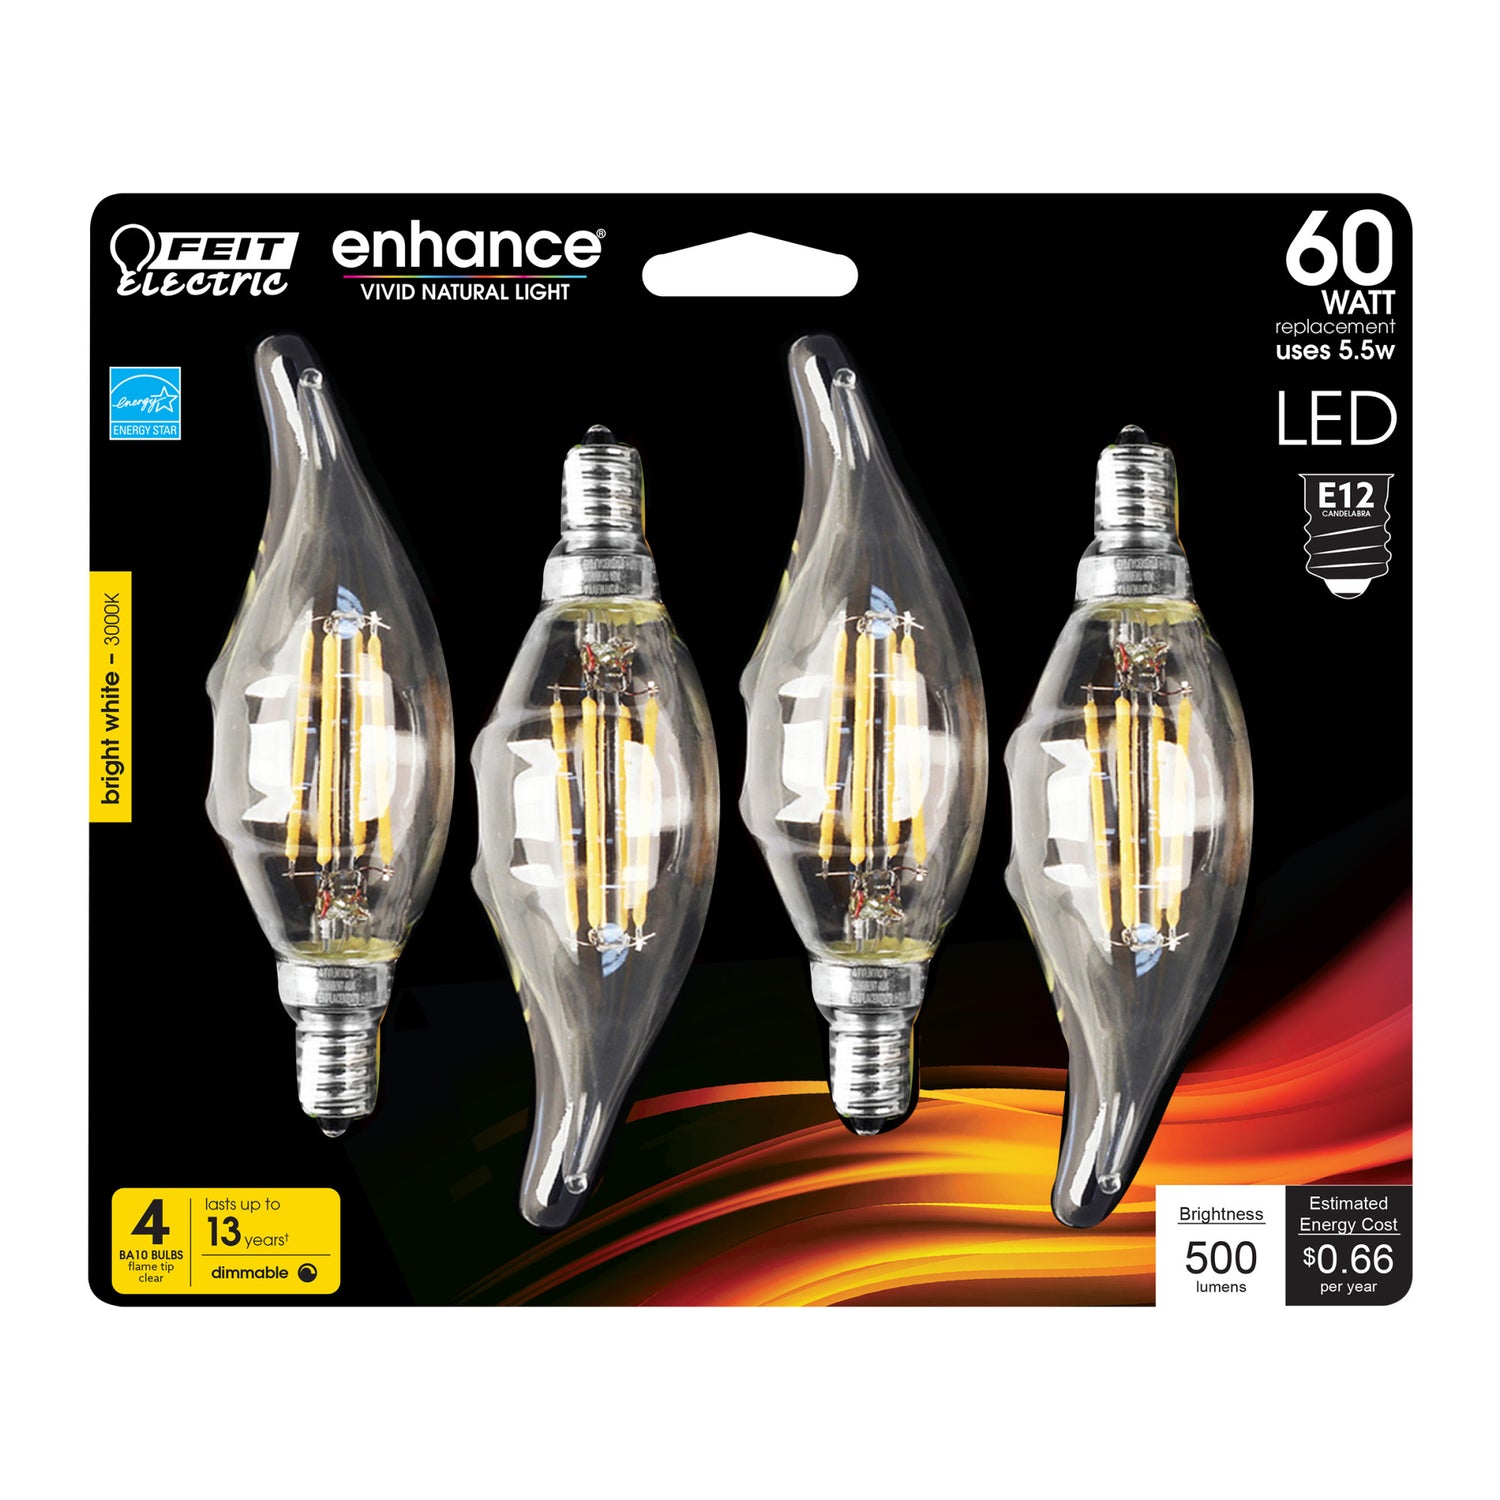 5.5W (60W Replacement) Bright White (3000K) E12 Base BA10 Flame Tip Filament LED Bulb (4-Pack)